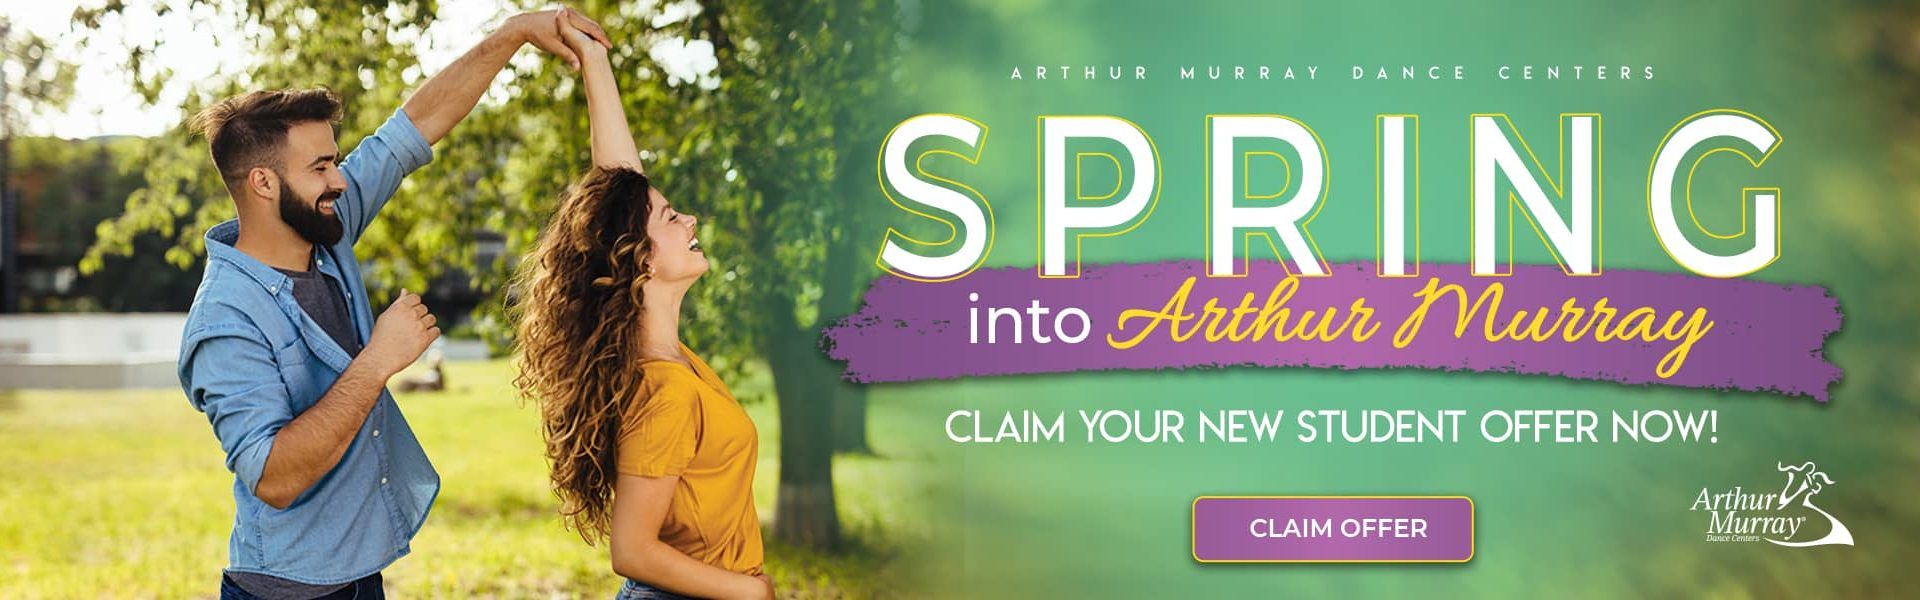 Arthur Murray Dance Lessons Near Me | Dance Classes for Couples and Singles